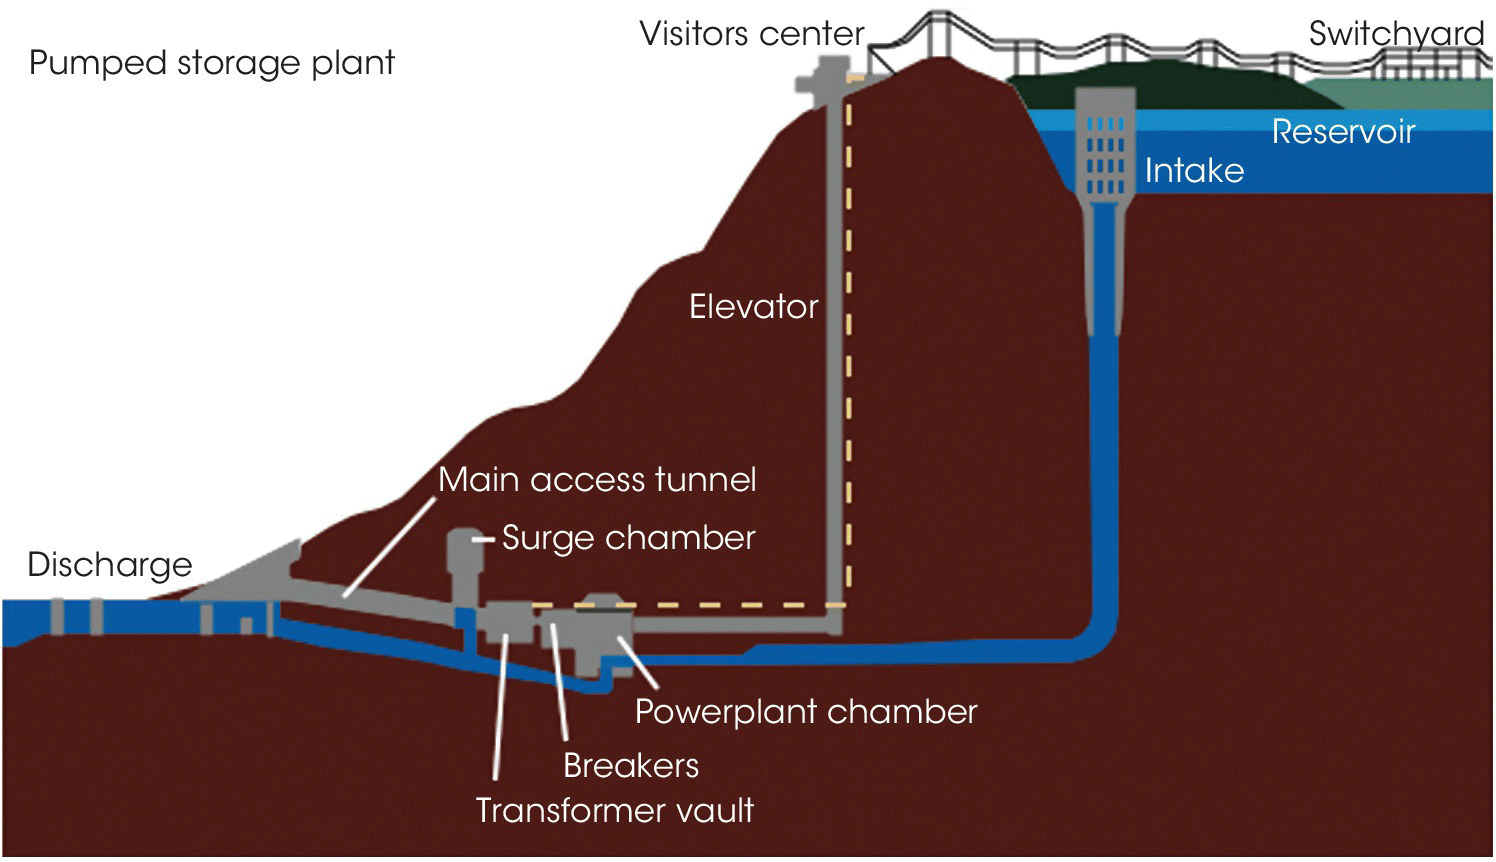 Schematic of the Raccoon Mountain Pumped Hydro Plant with areas labeled switchyard, reservoir, intake, visitor’s center, elevator, surge chamber, powerplant chamber, breakers, transformer vault, etc.